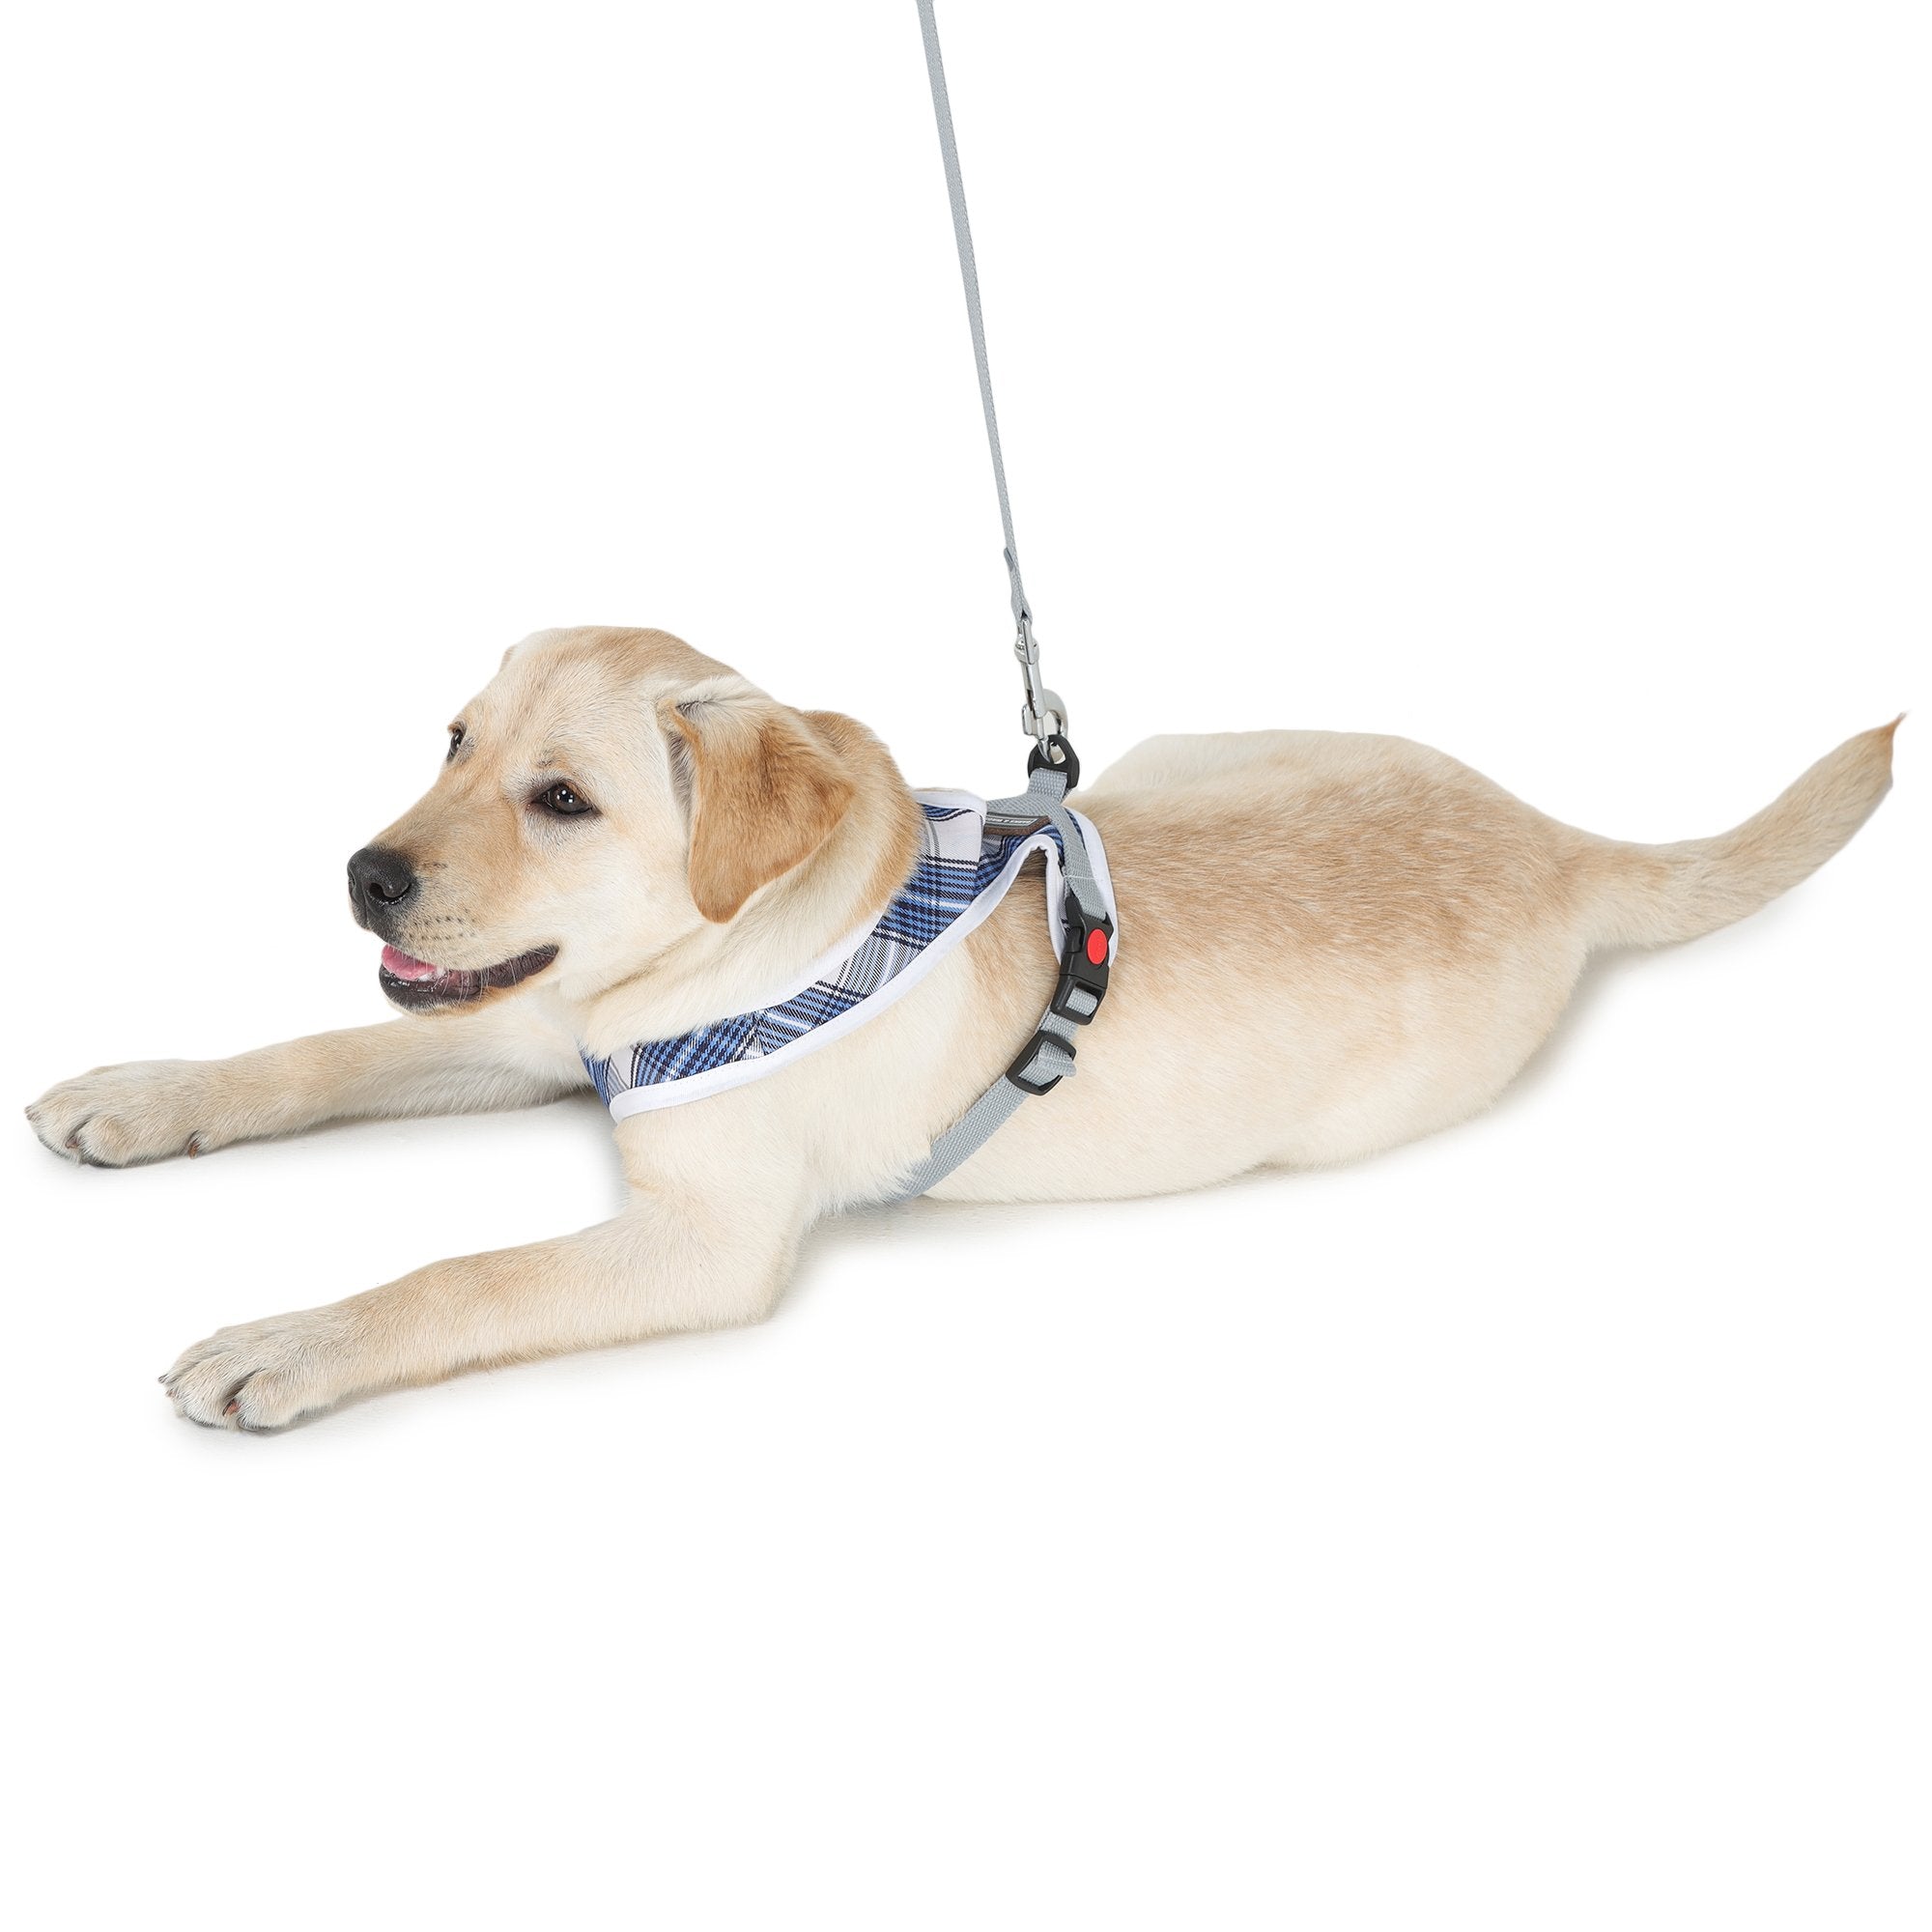 cute dog in Barks & Wags harness